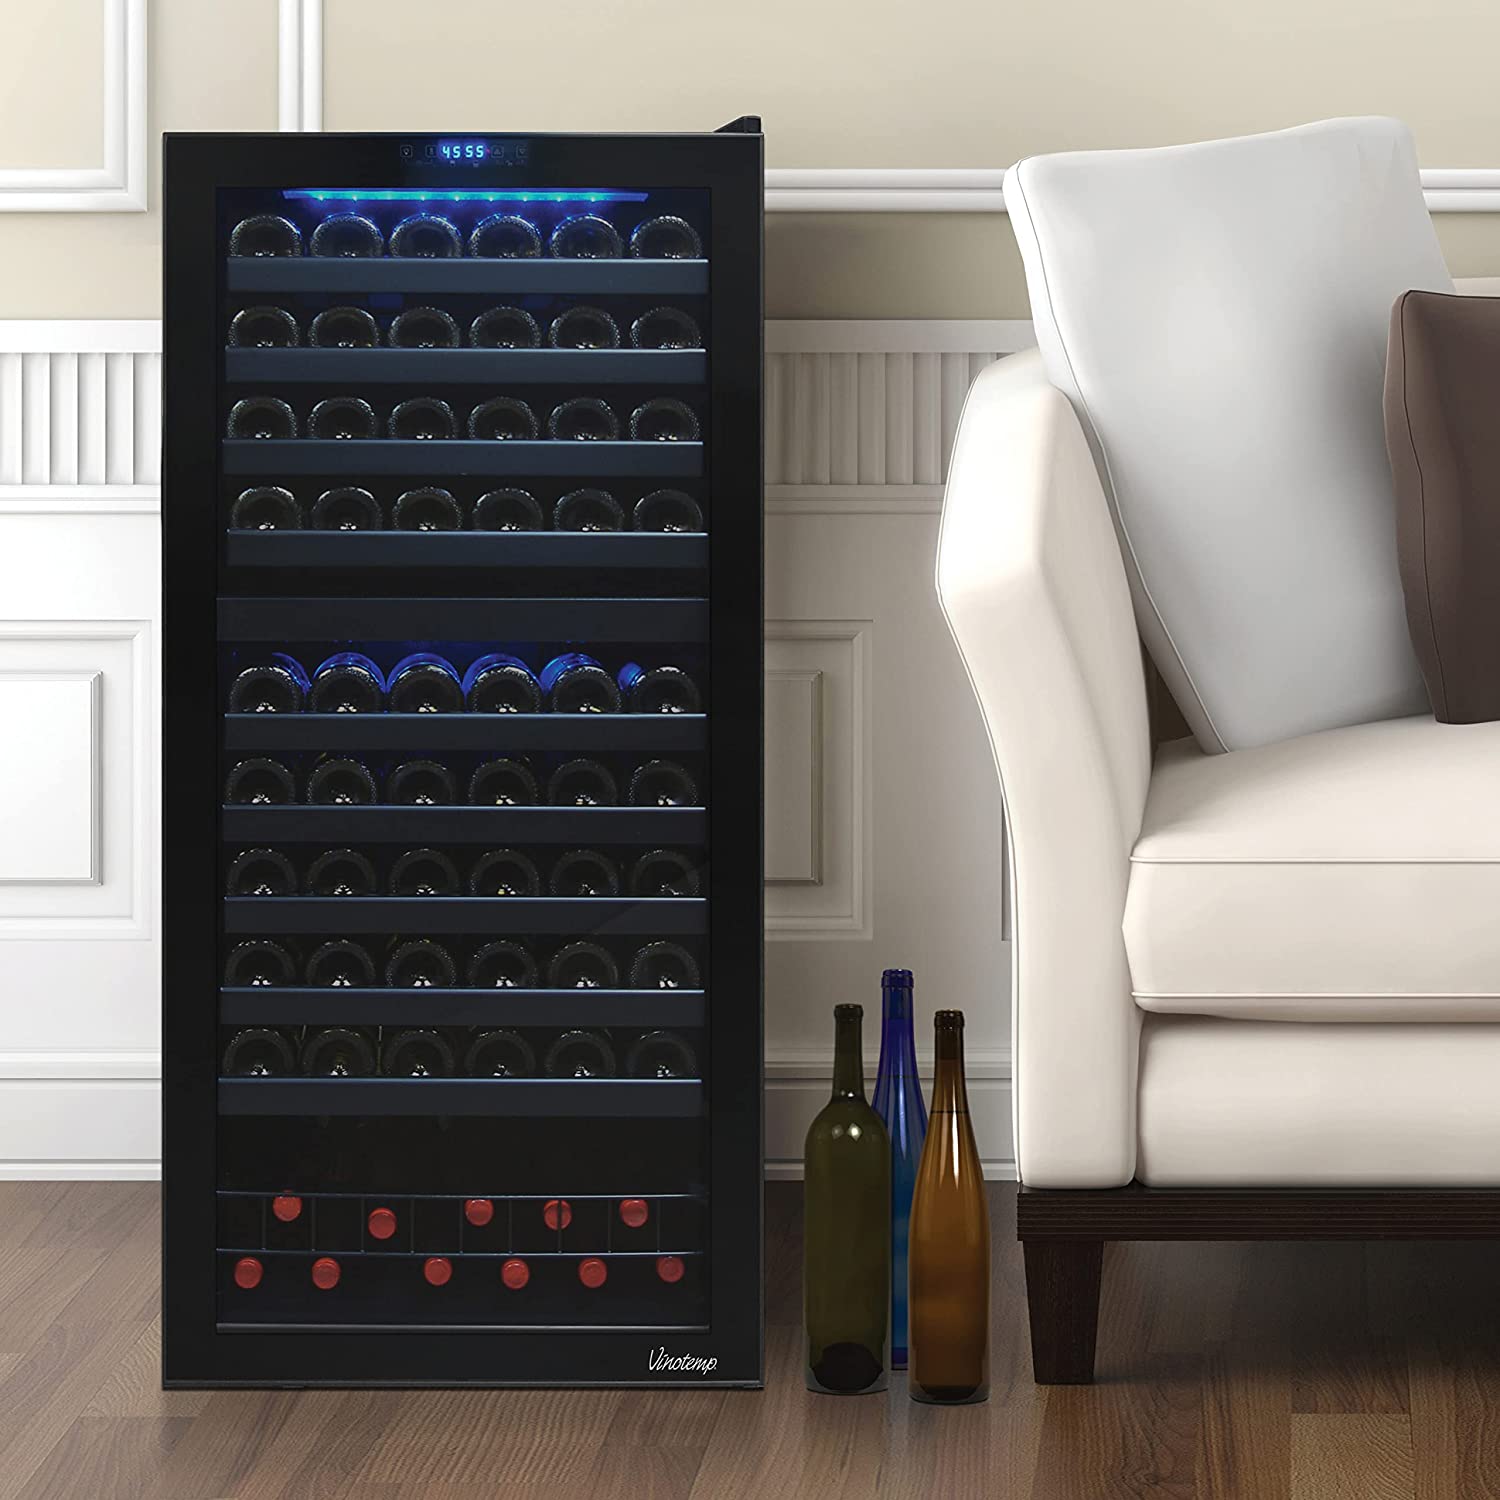 A wine cooler with a temperature range display